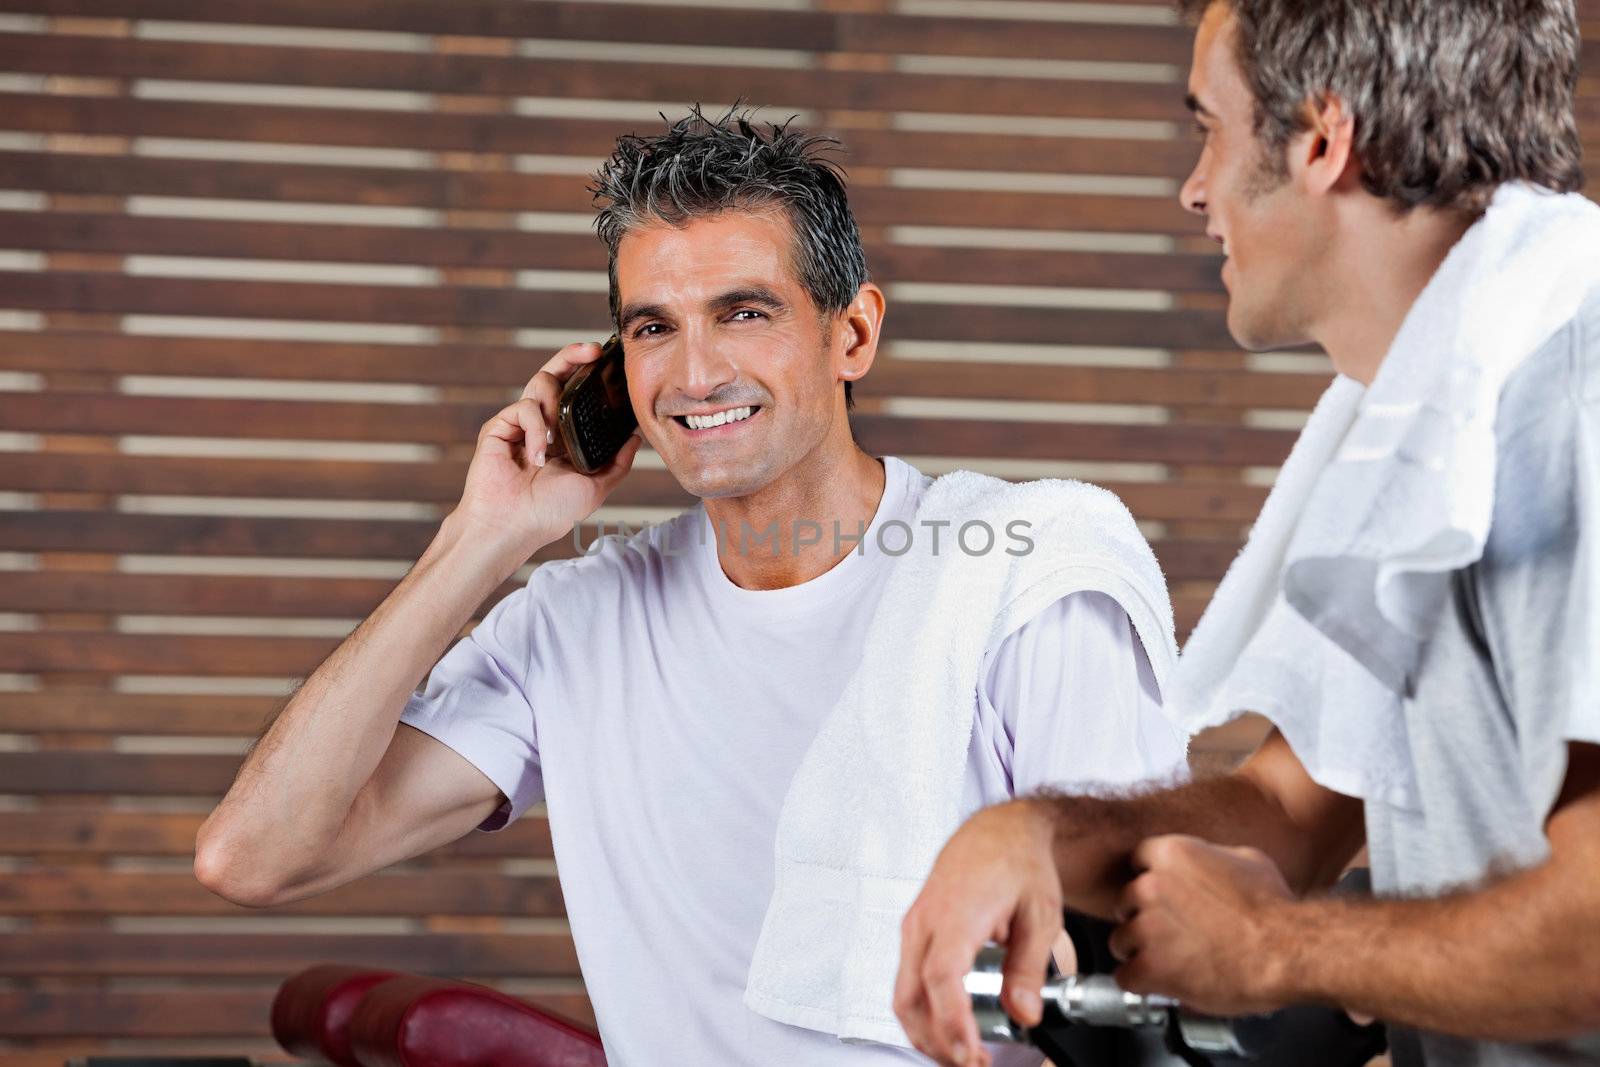 Man On Call While Friend Looking At Him In Health Club by leaf